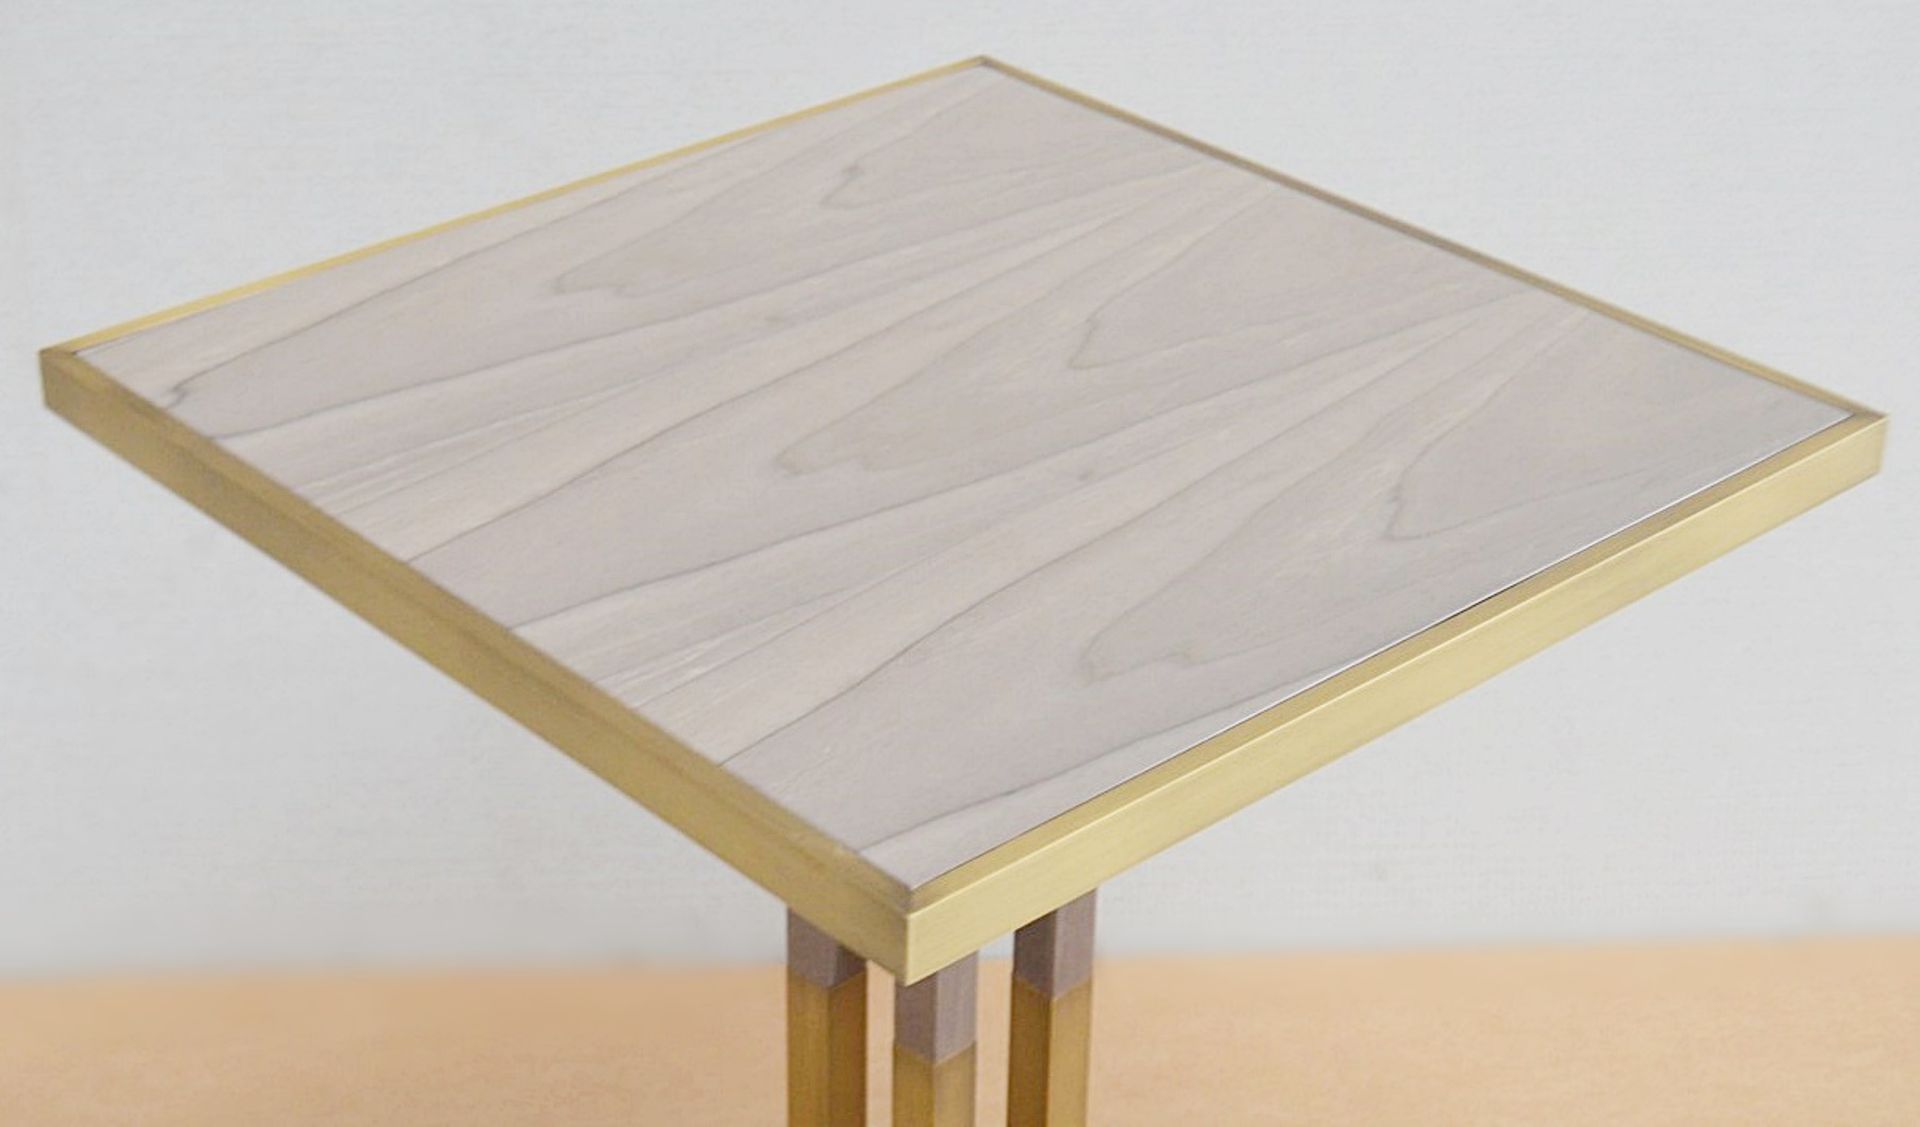 1 x FRATO 'Perth' Luxury Side Table With A Limed Wood Finish and Brushed Brass Details - RRP £1,626 - Image 6 of 6